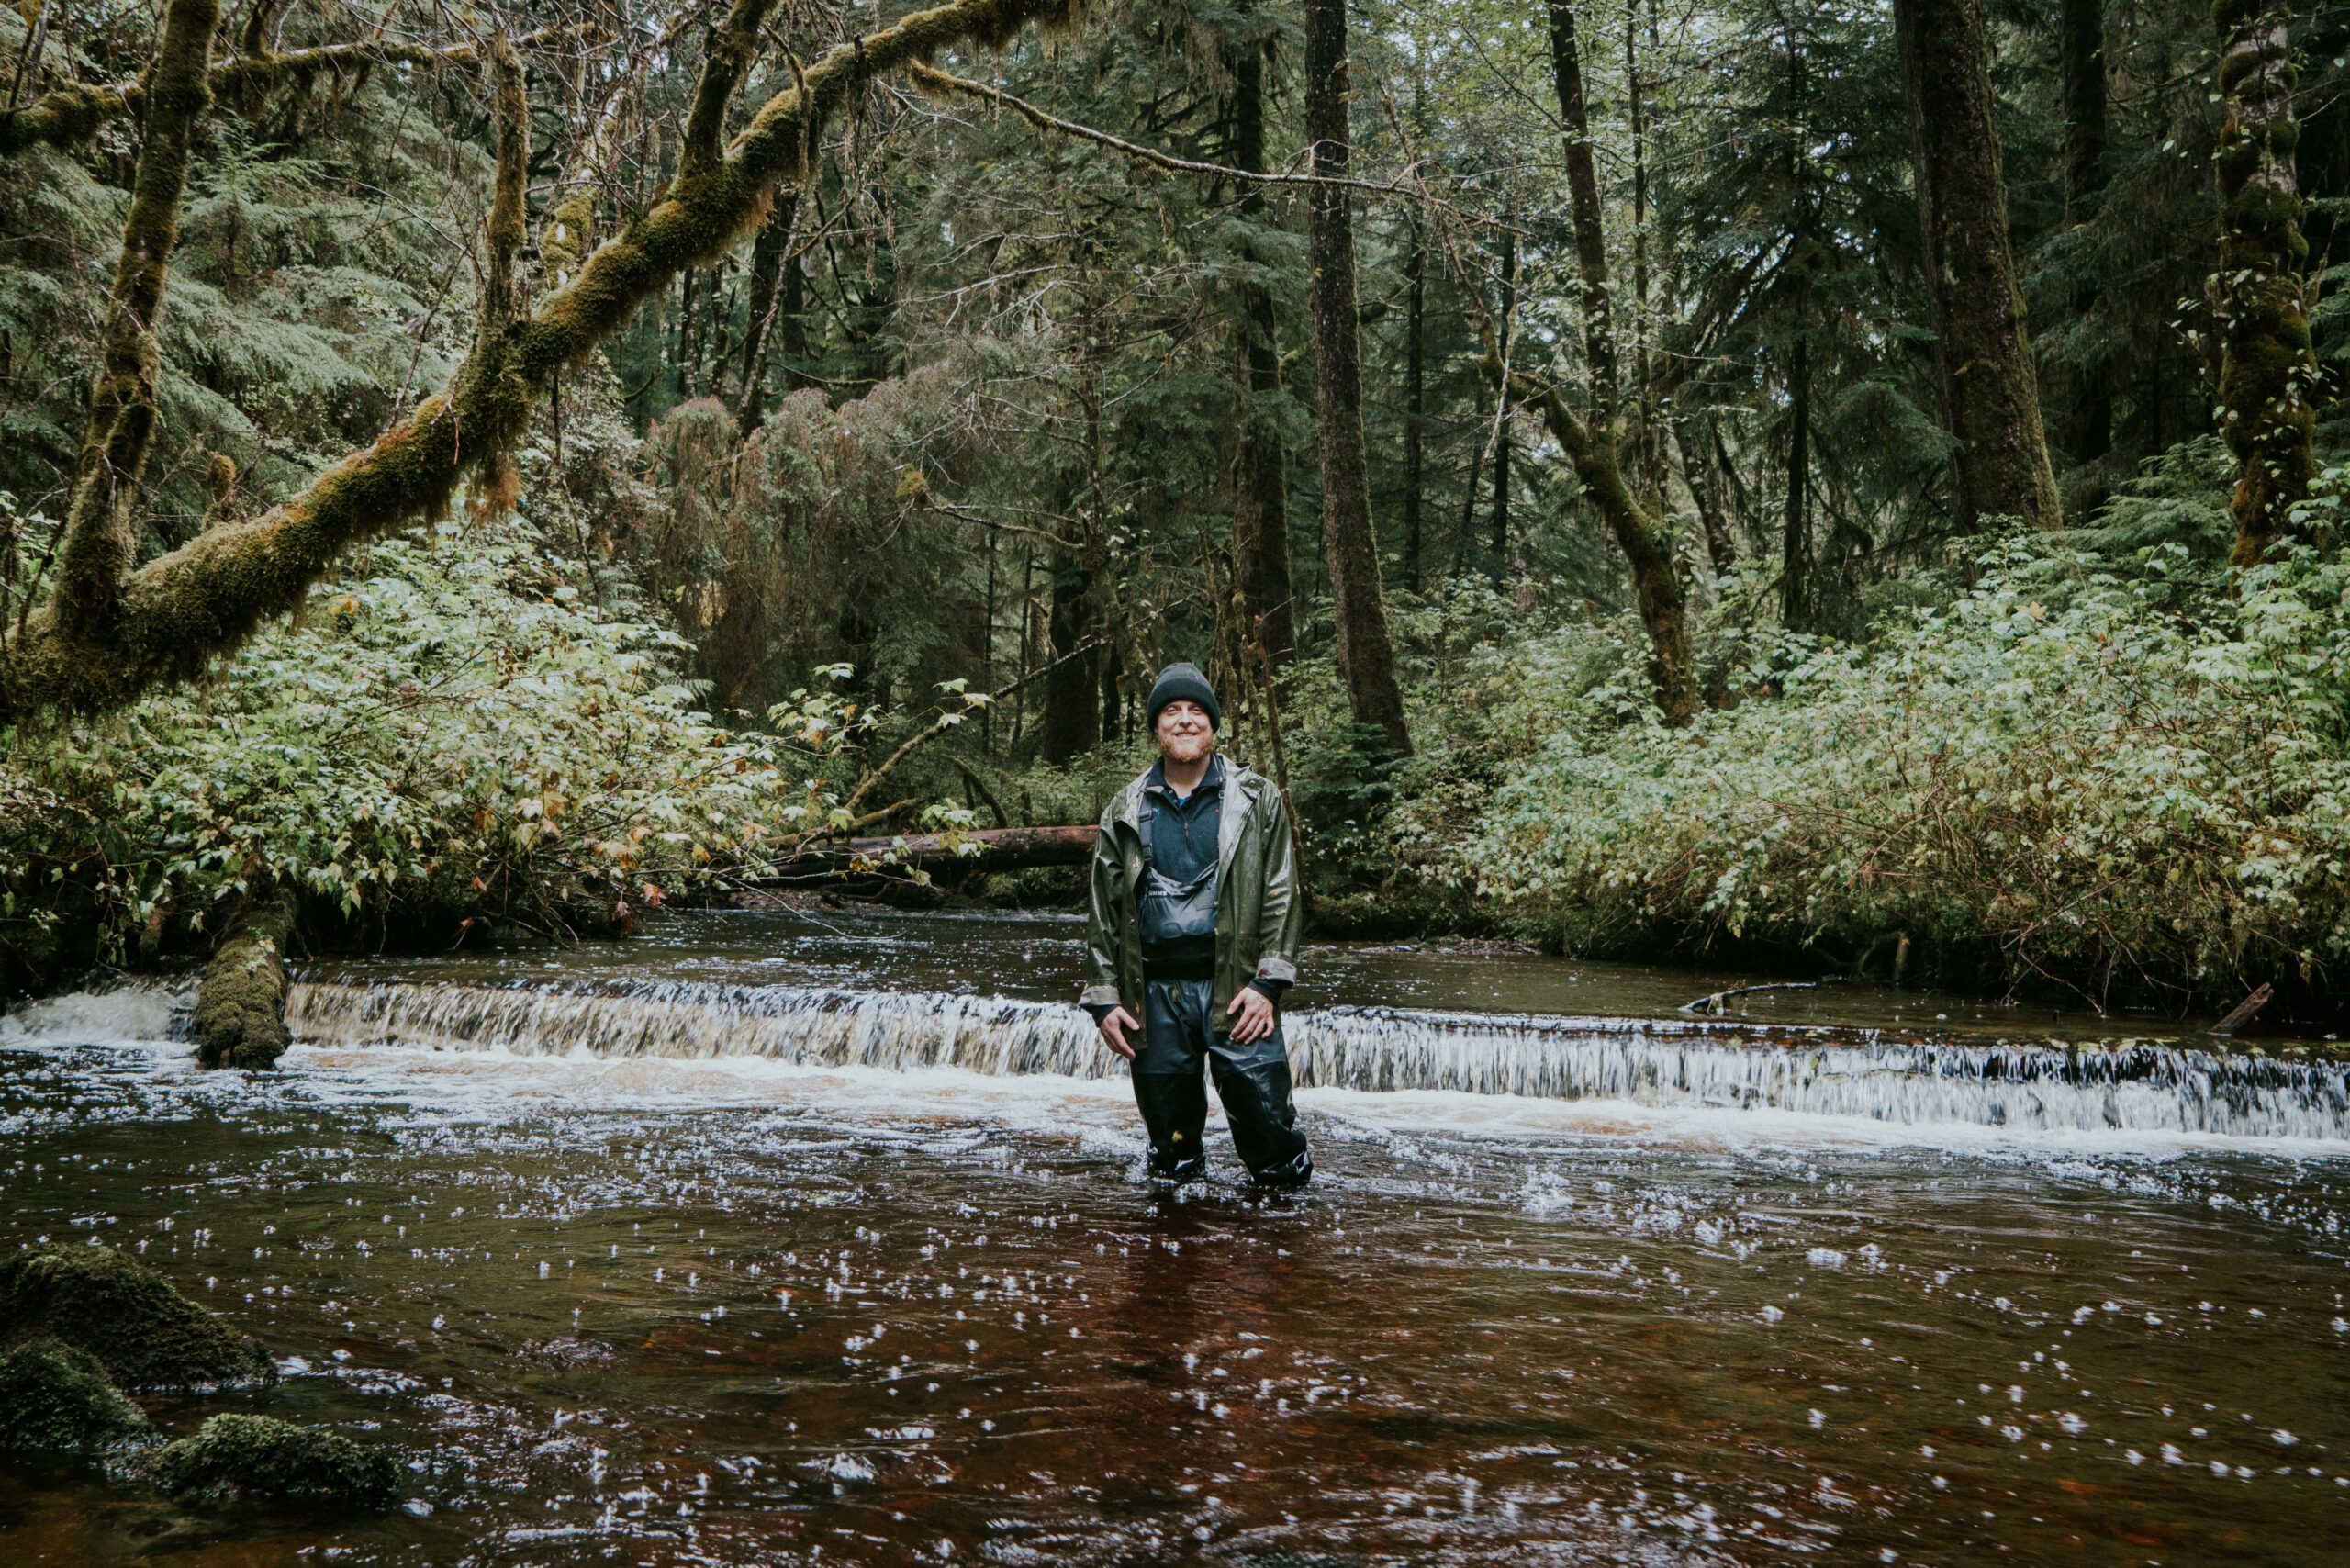 A man stands in waders in a river